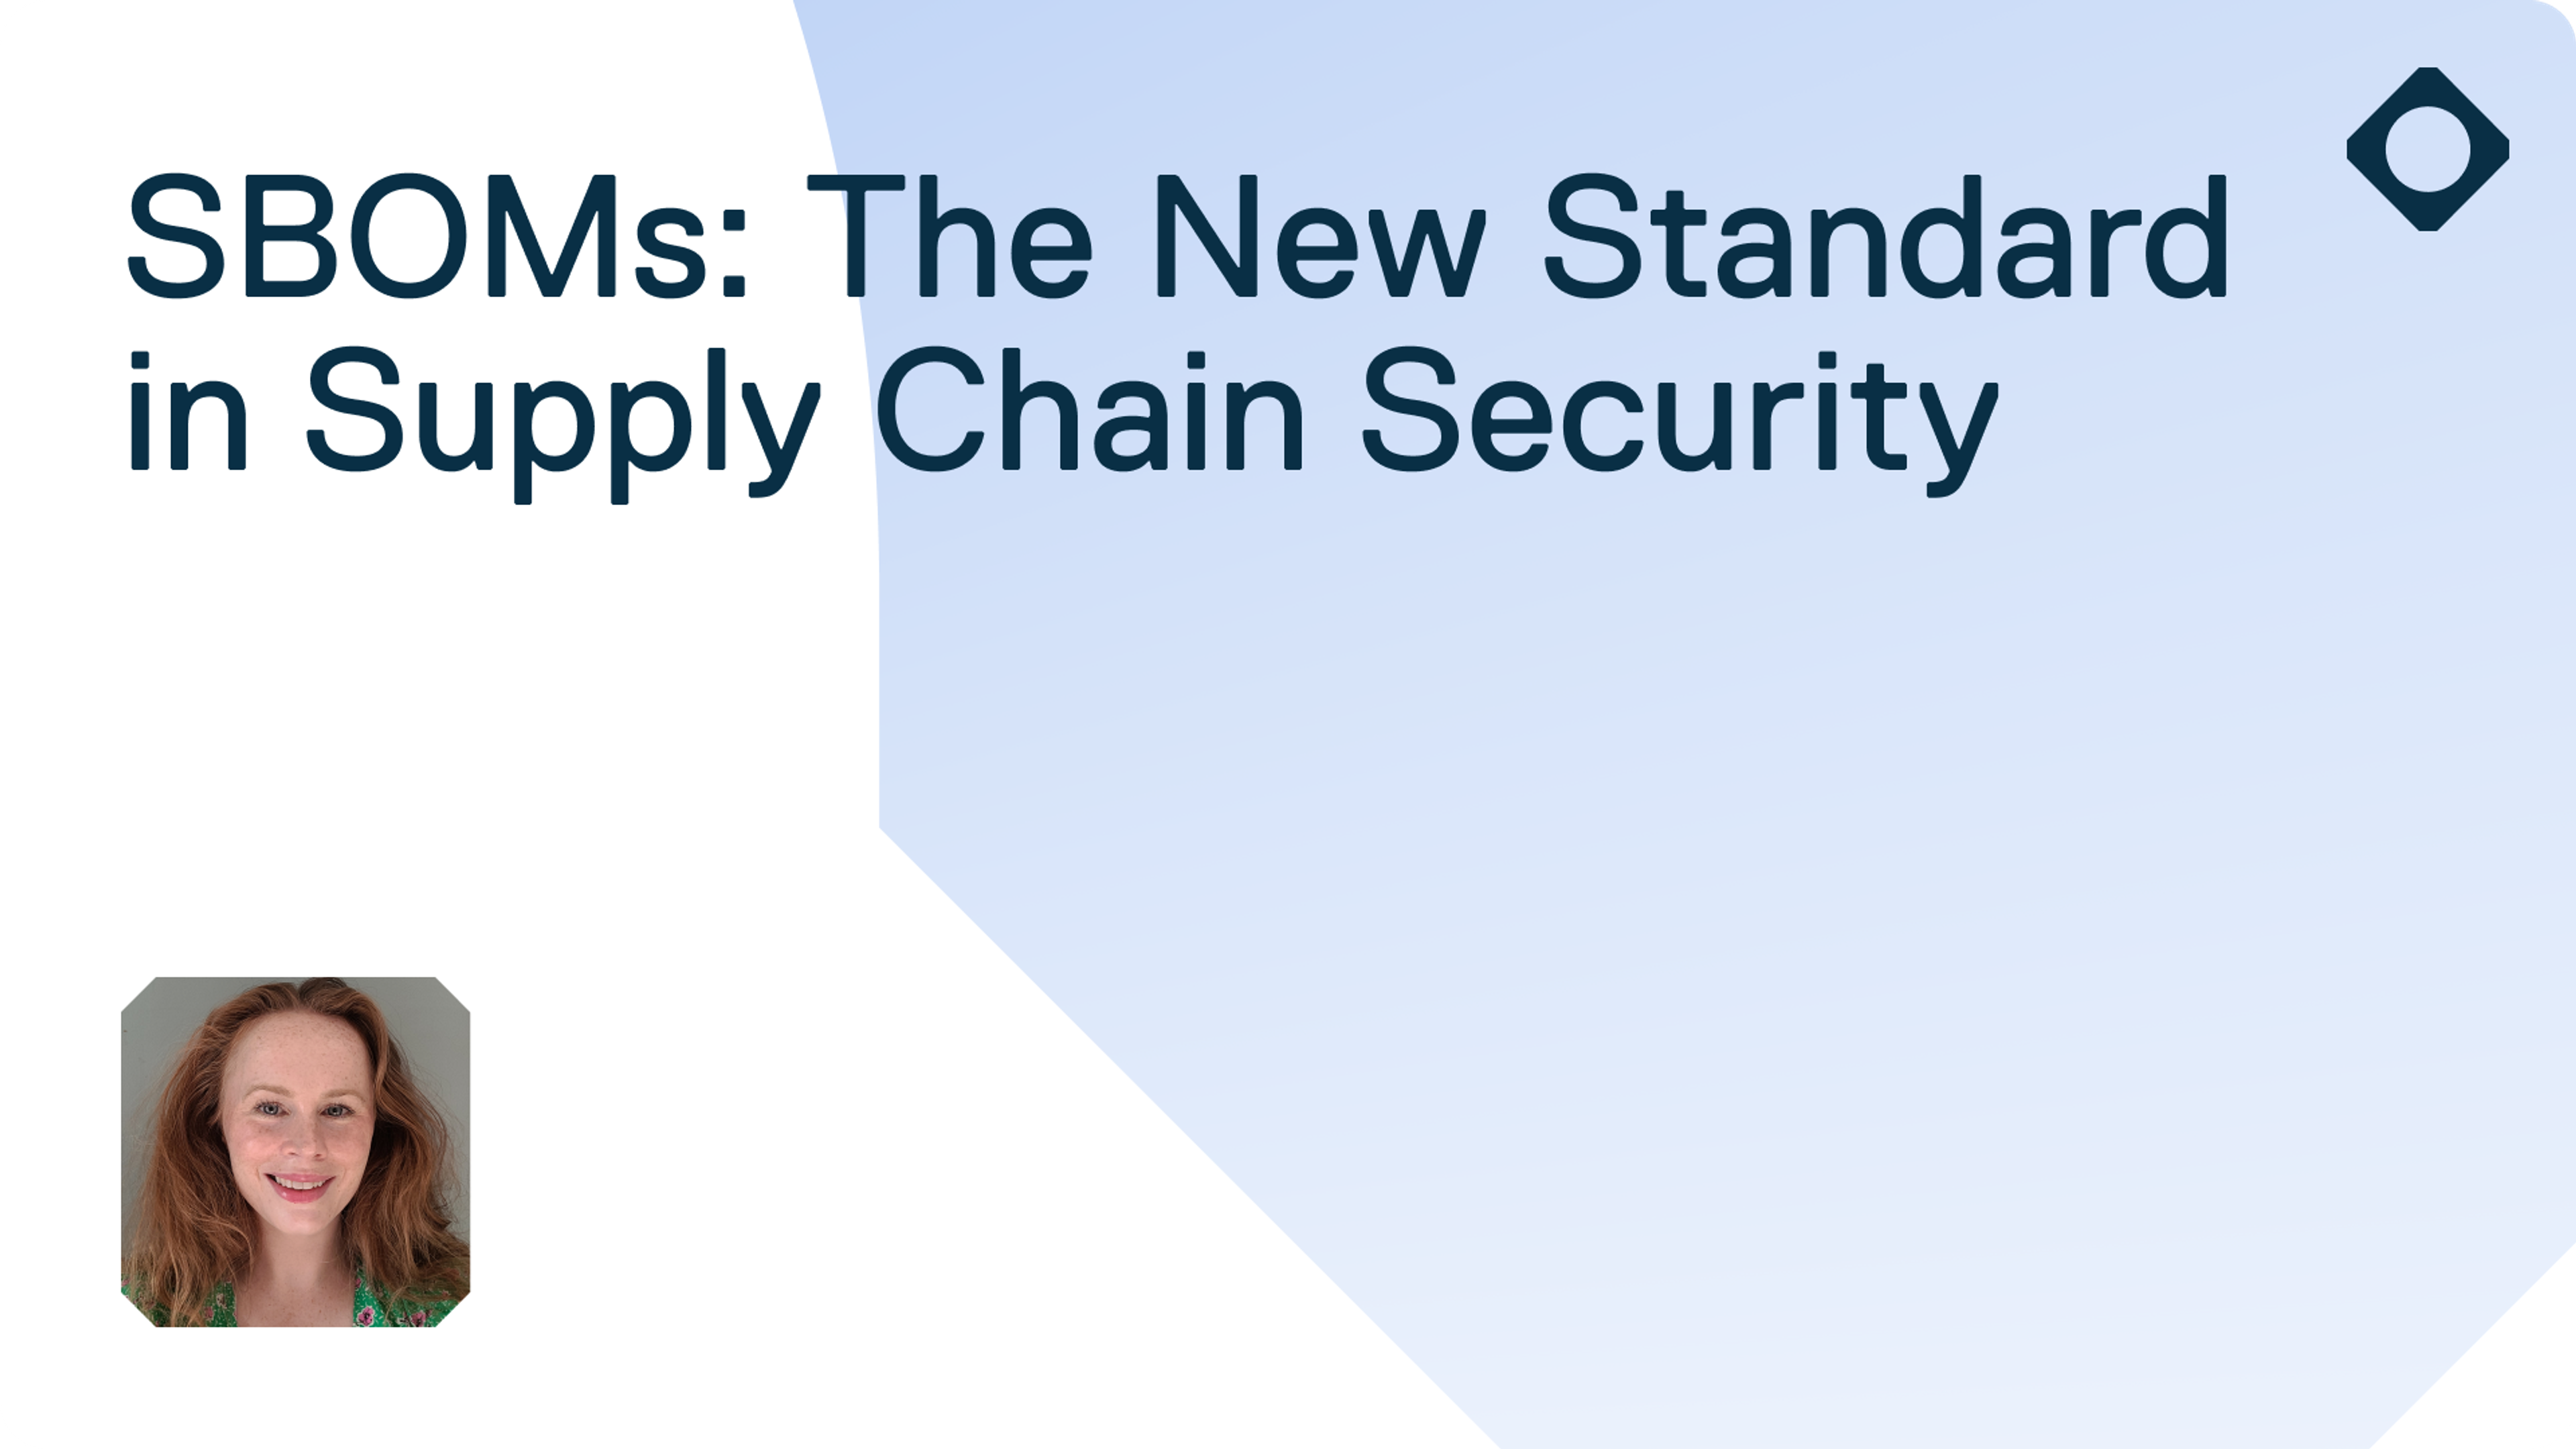 SBOMs: The New Standard in Supply Chain Security